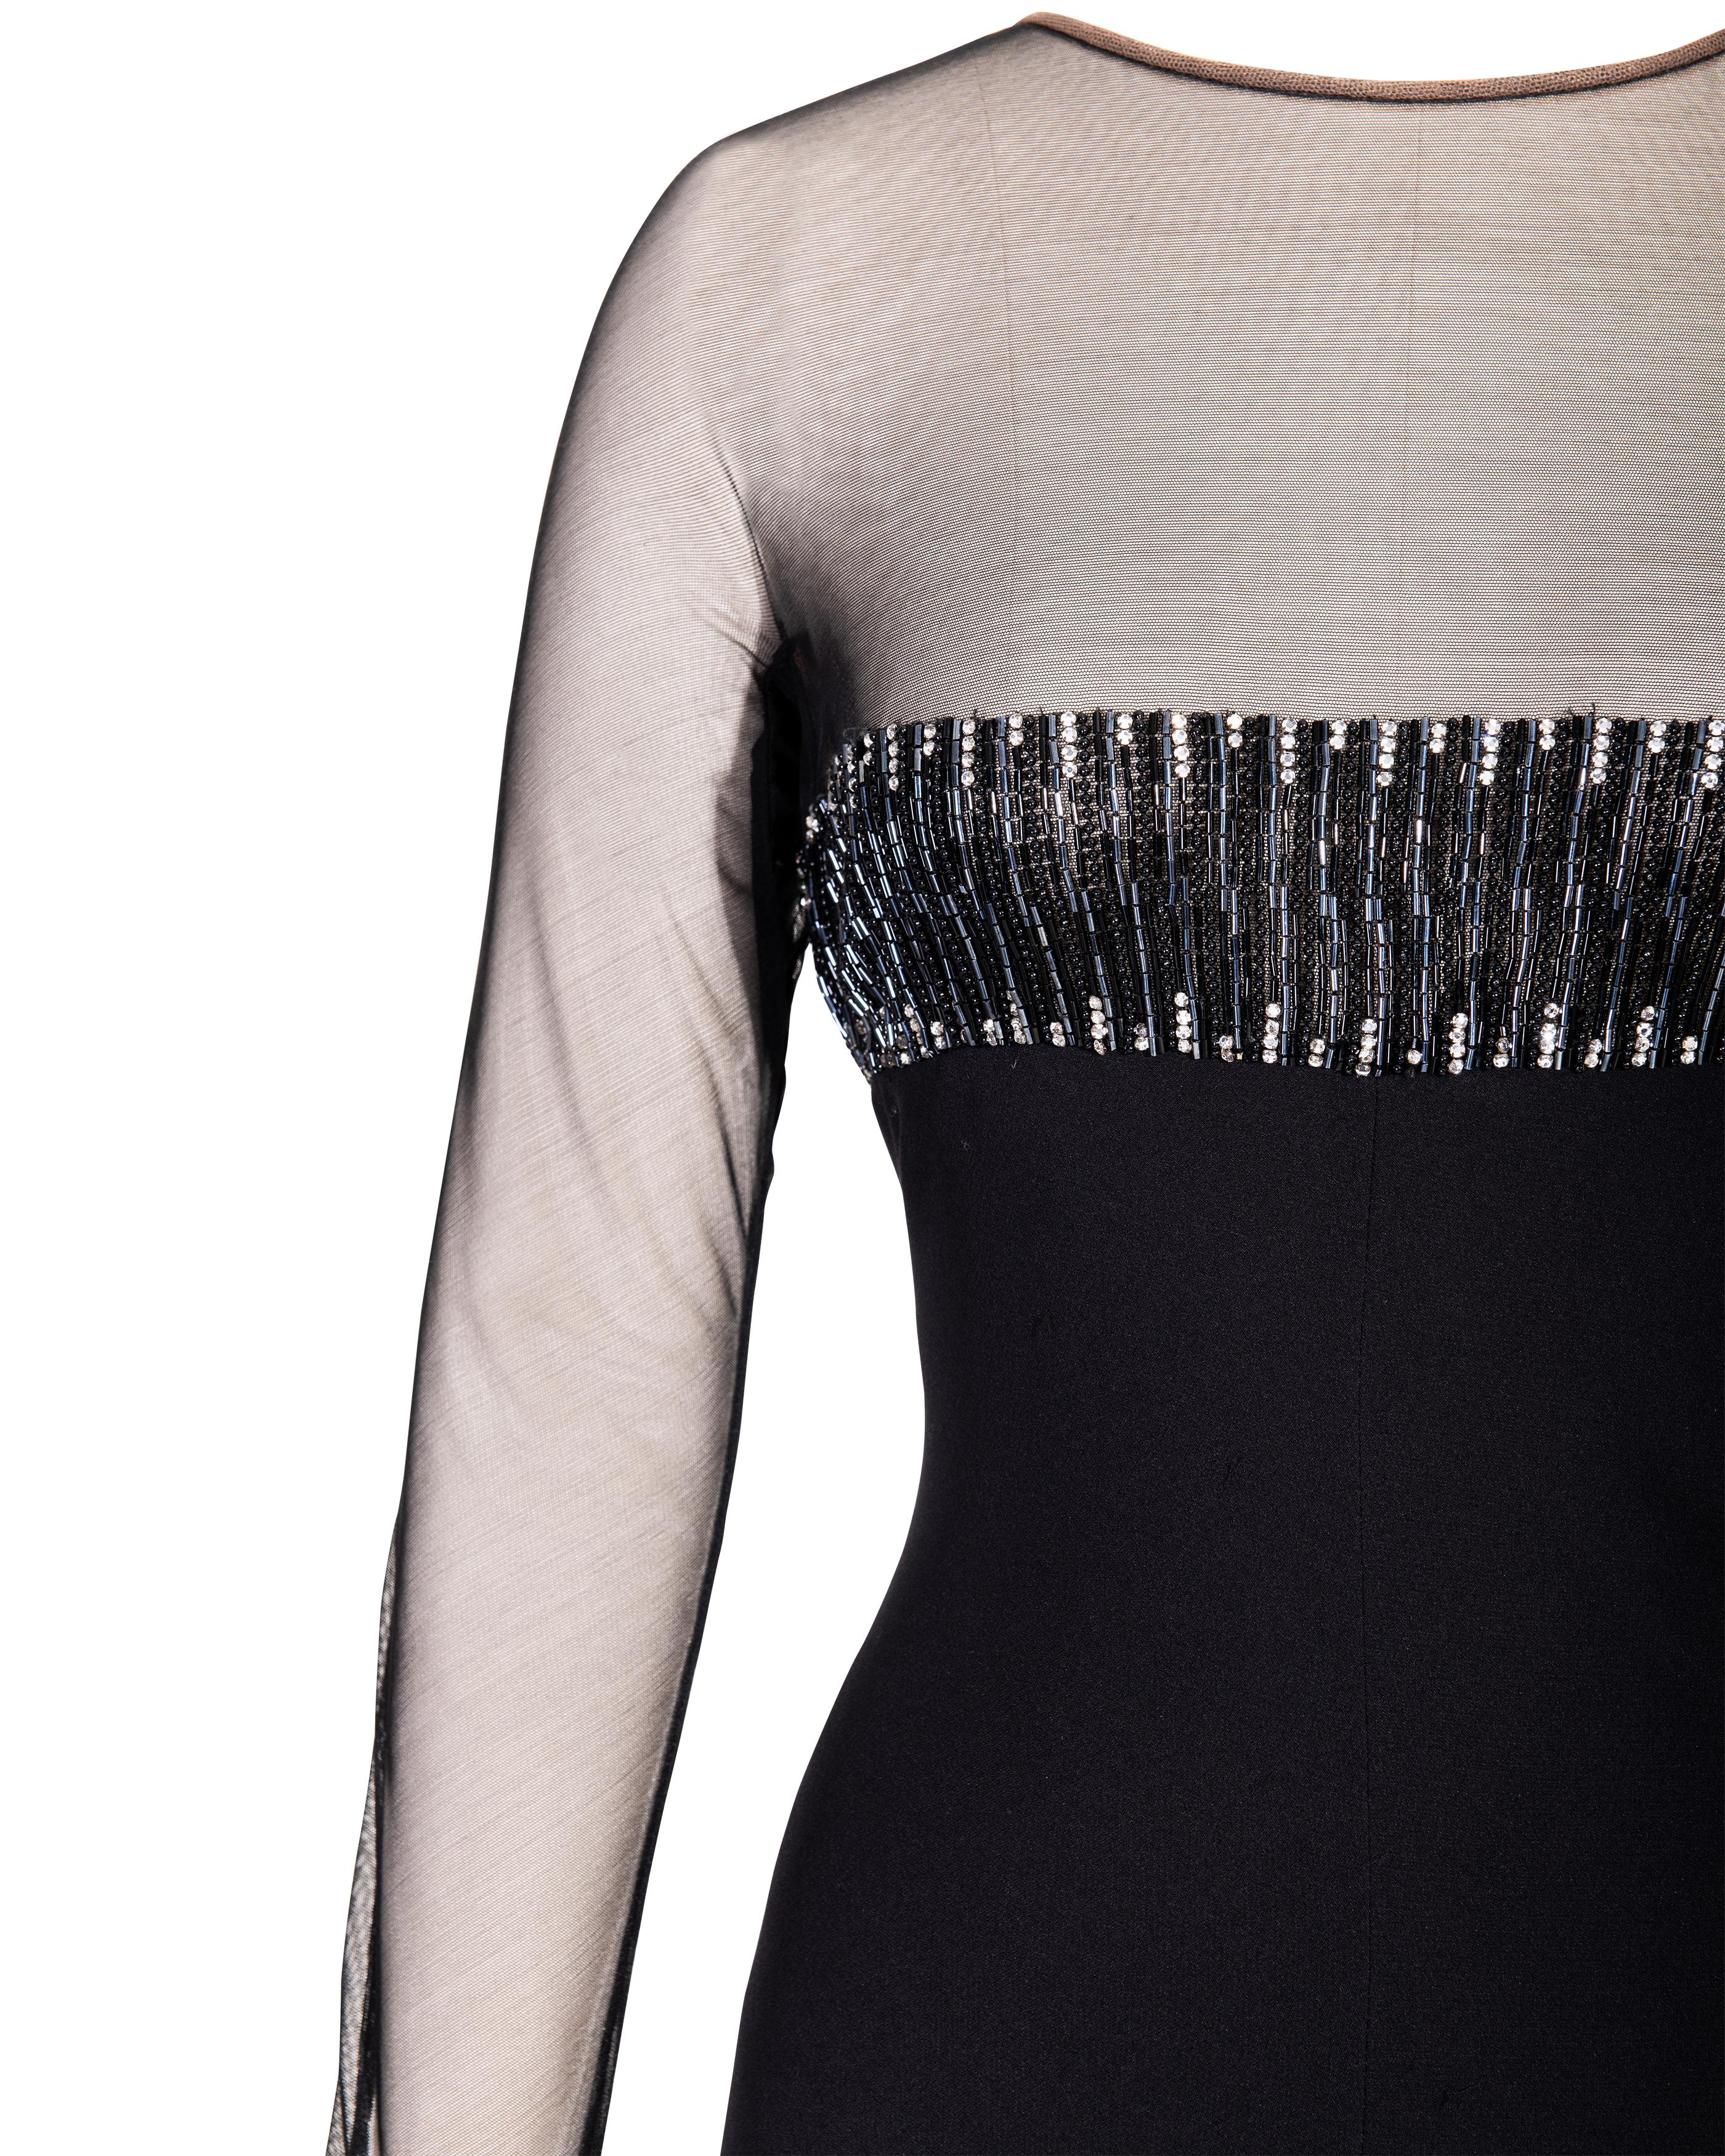 c. 1999 Valentino (Attributed) Black Long Sleeve Embellished Silk and Mesh Gown 1